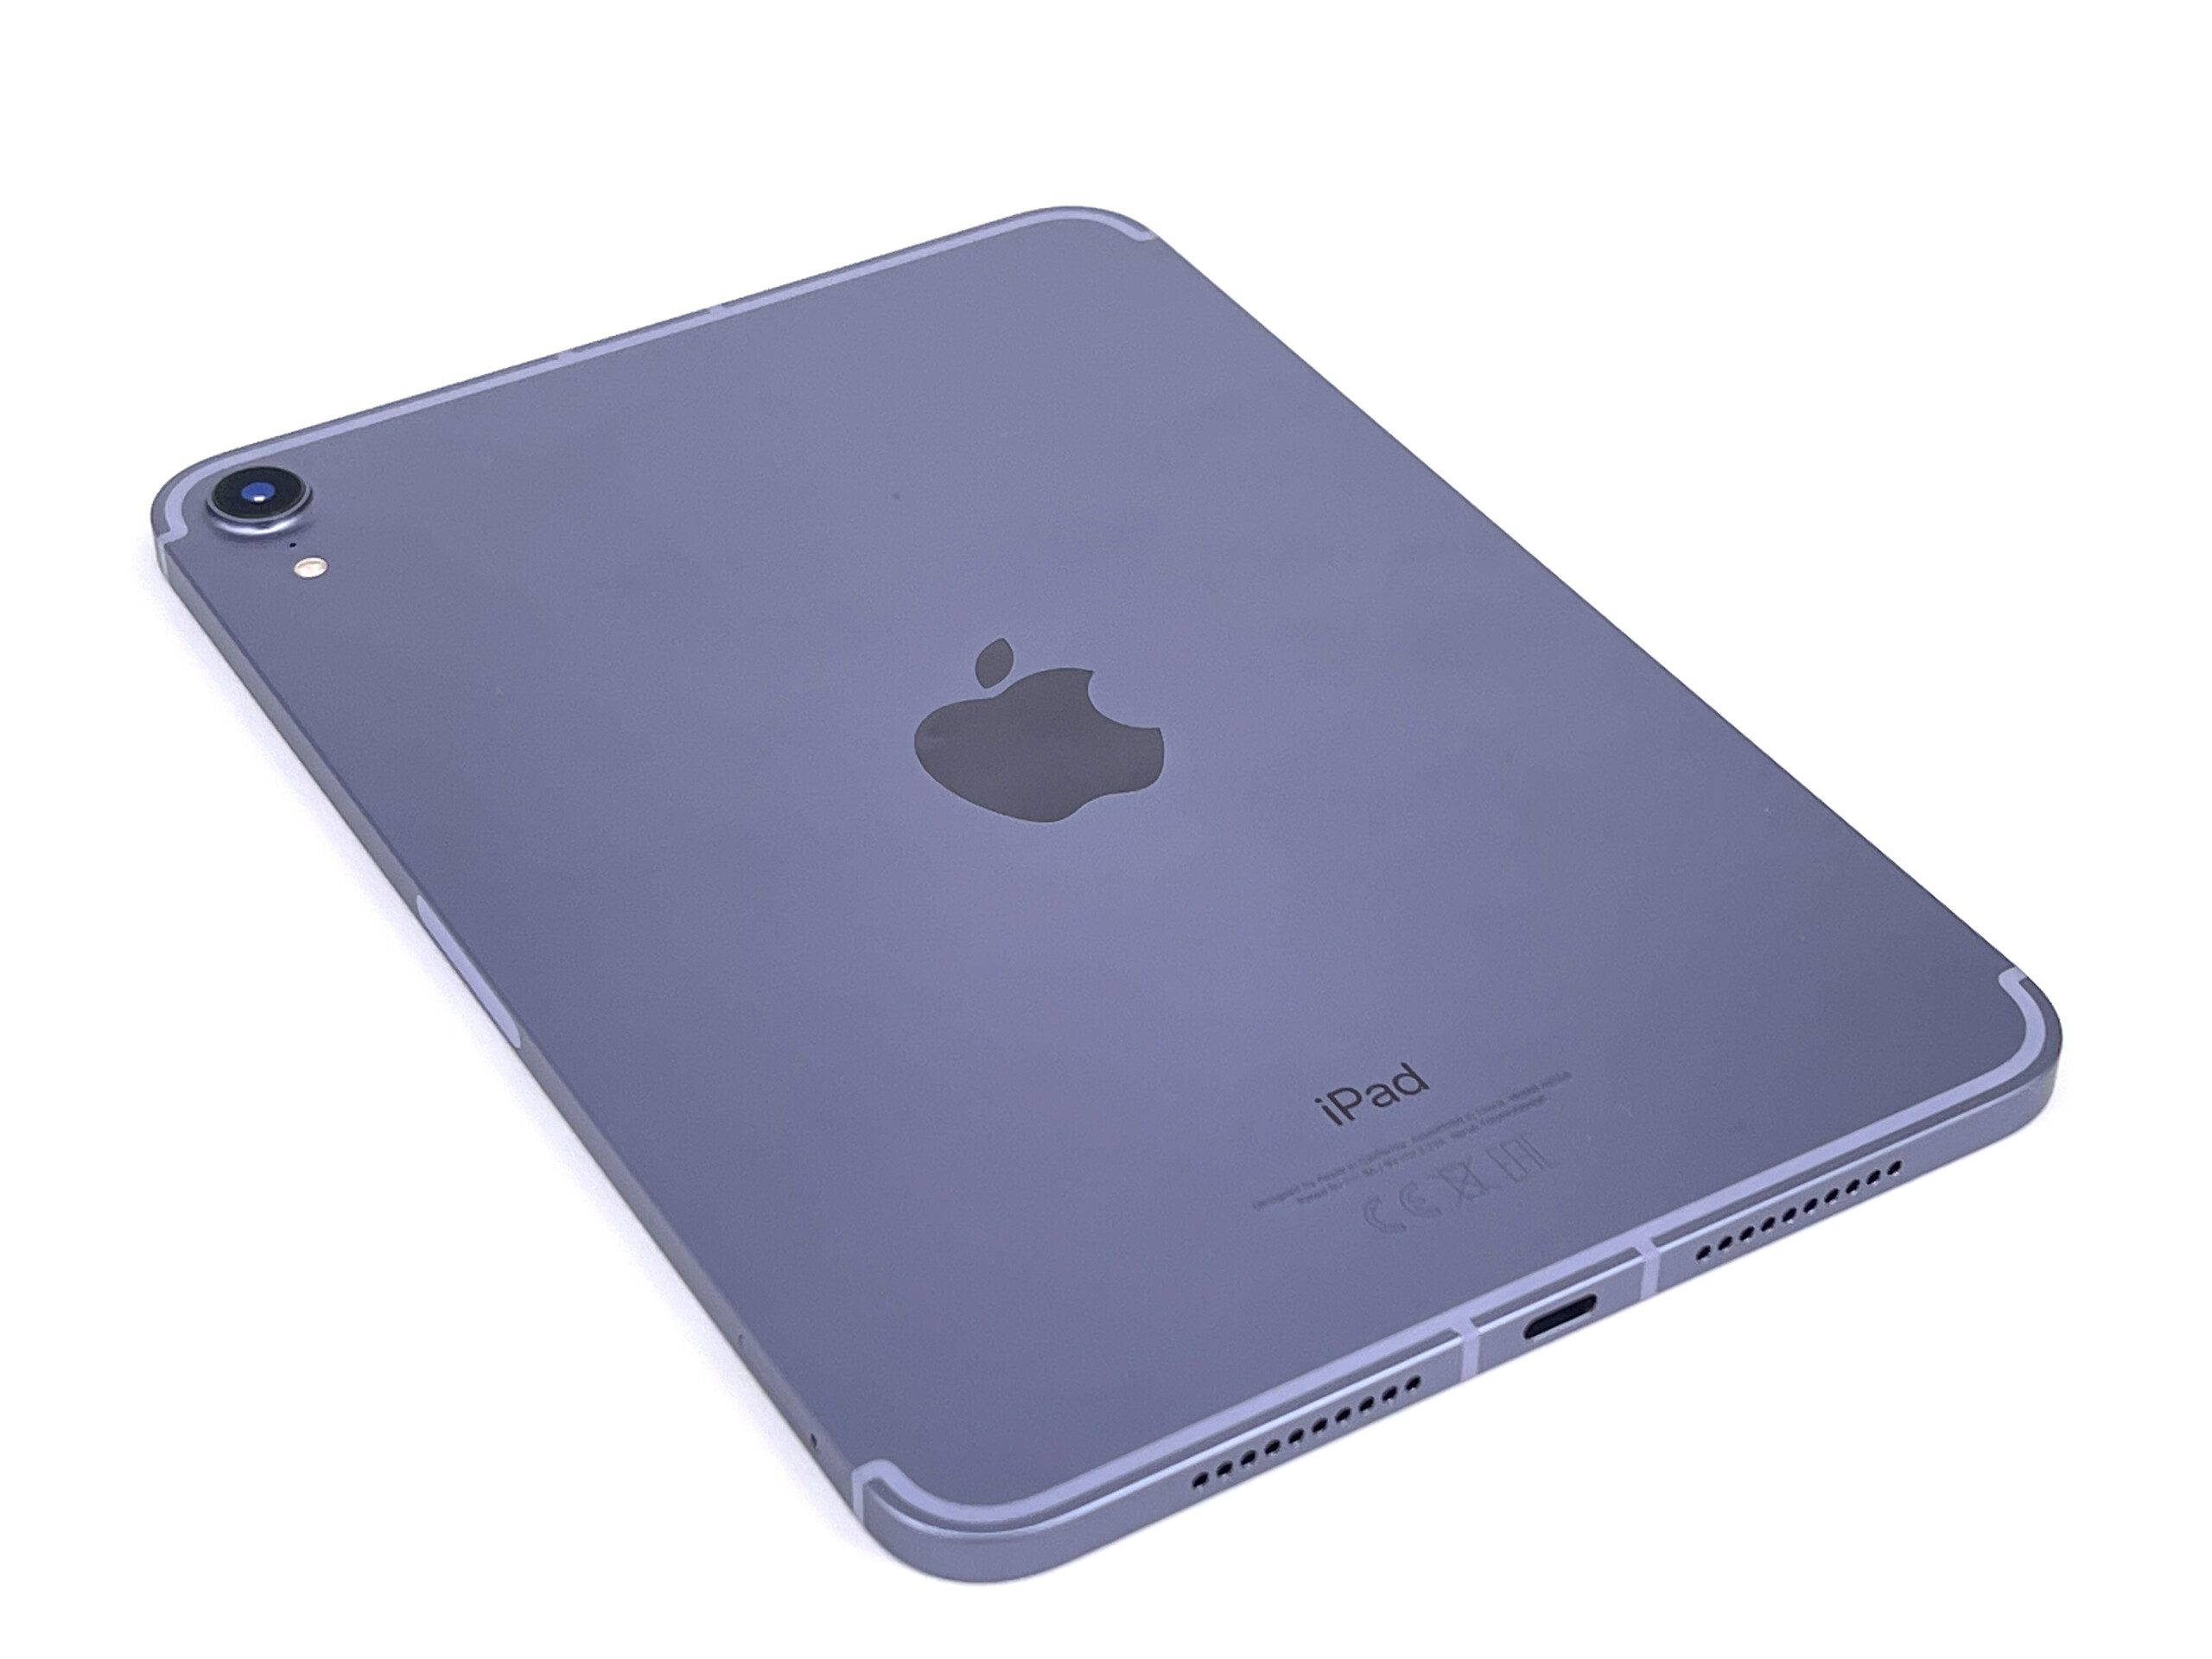 Apple iPad Mini 6 review – Apple's attractive, small tablet with